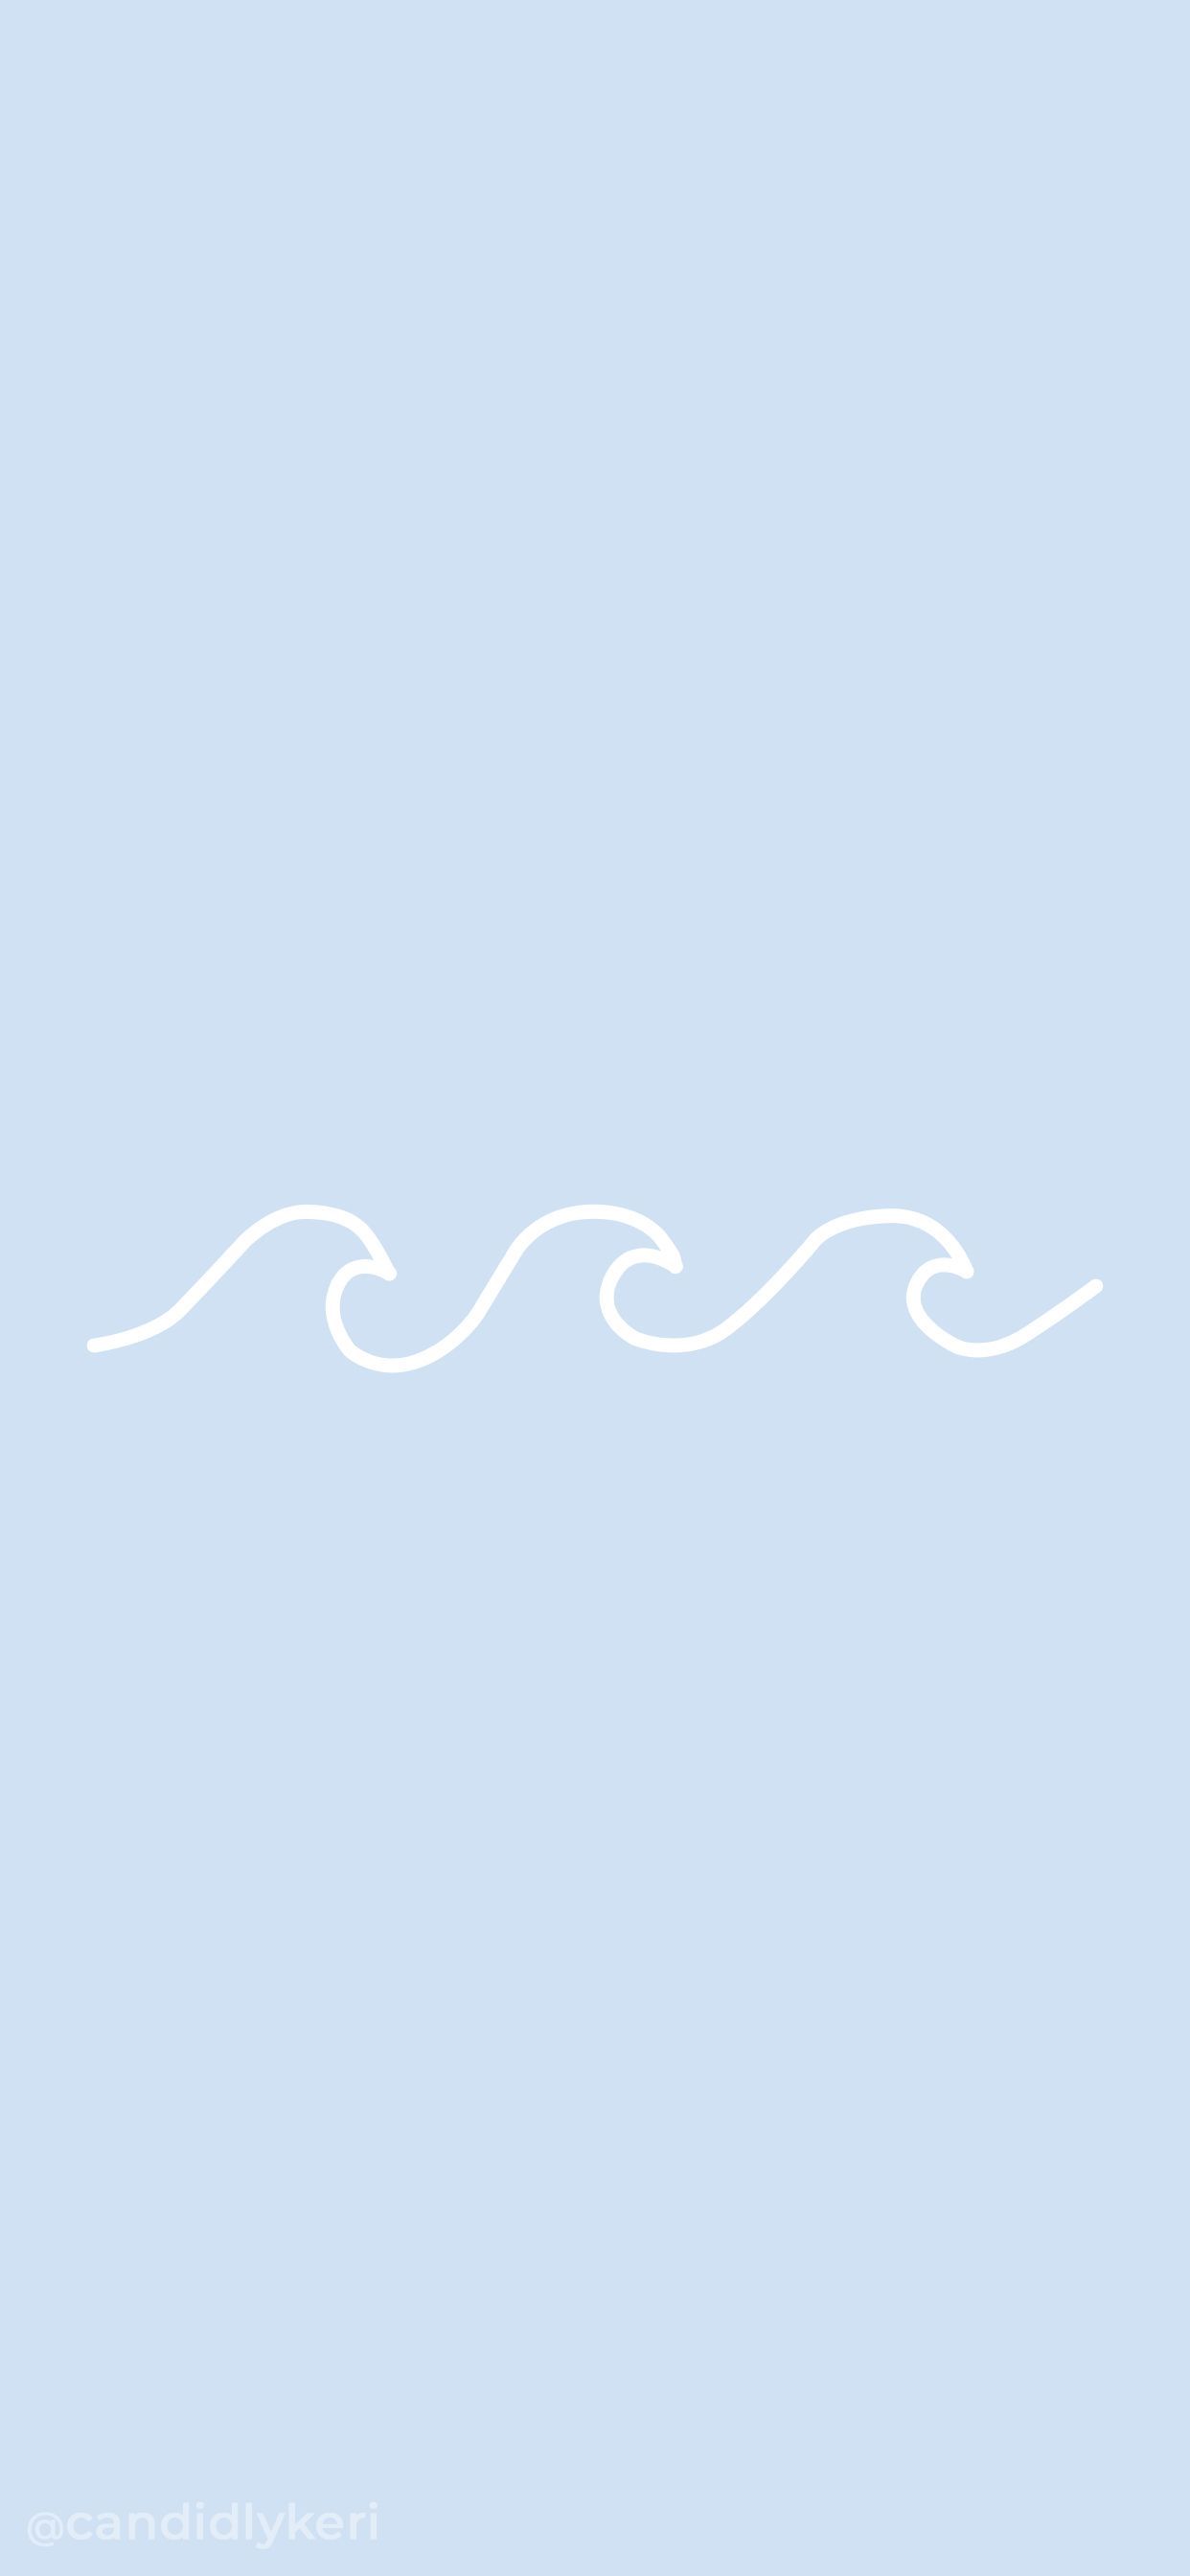 A blue background with white waves on it - Blue, wave, light blue, minimalist